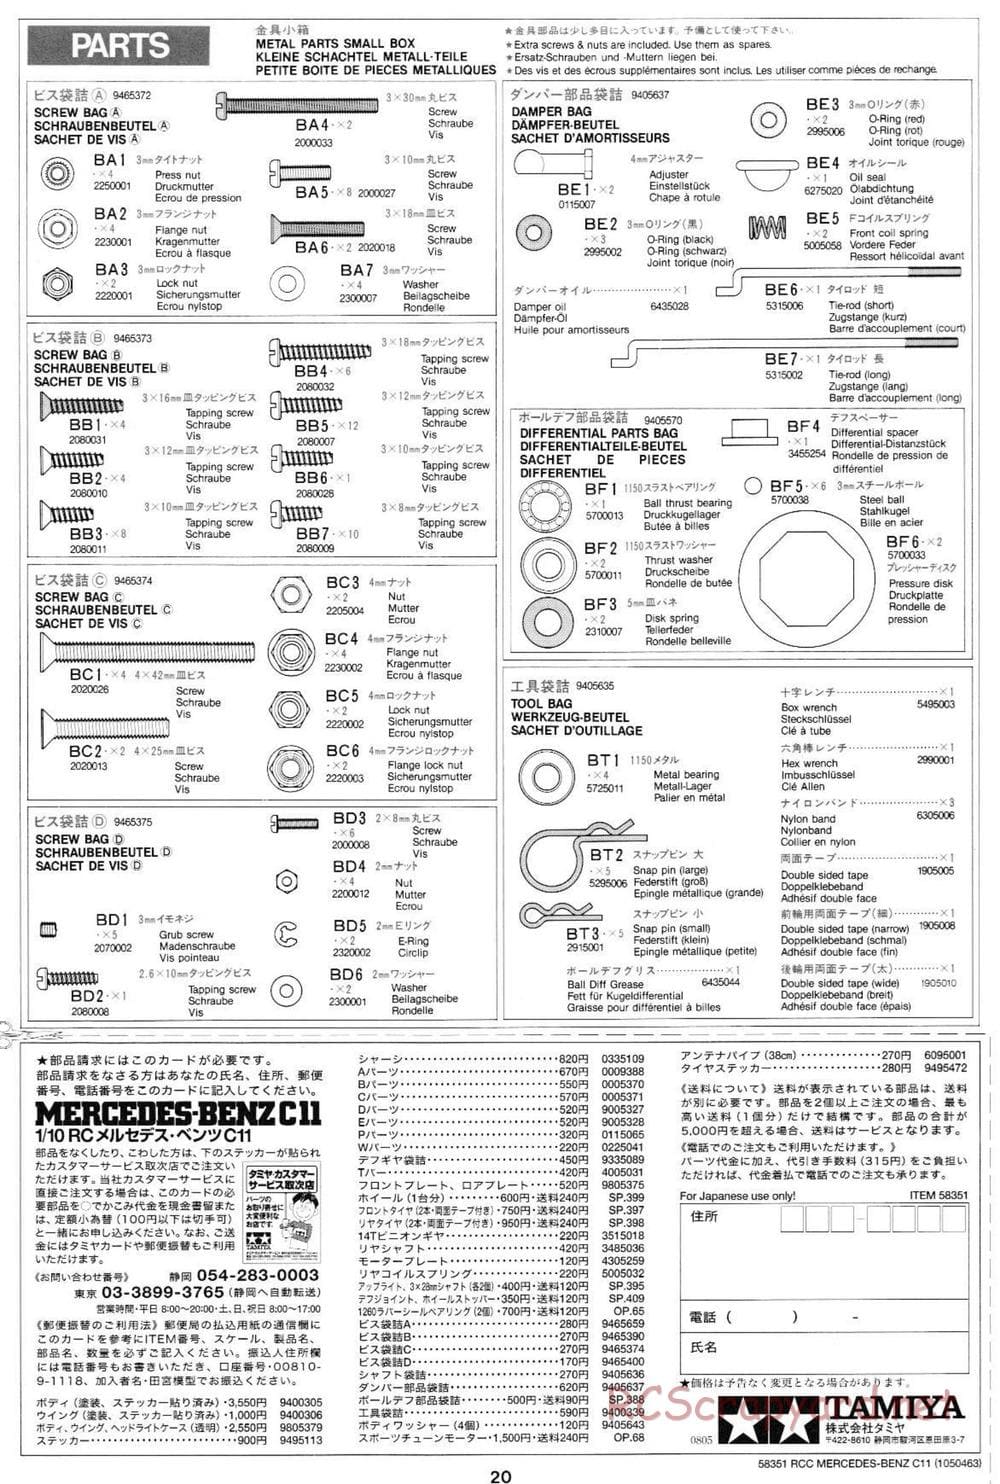 Tamiya - Mercedes-Benz C11 - Group-C Chassis - Manual - Page 20